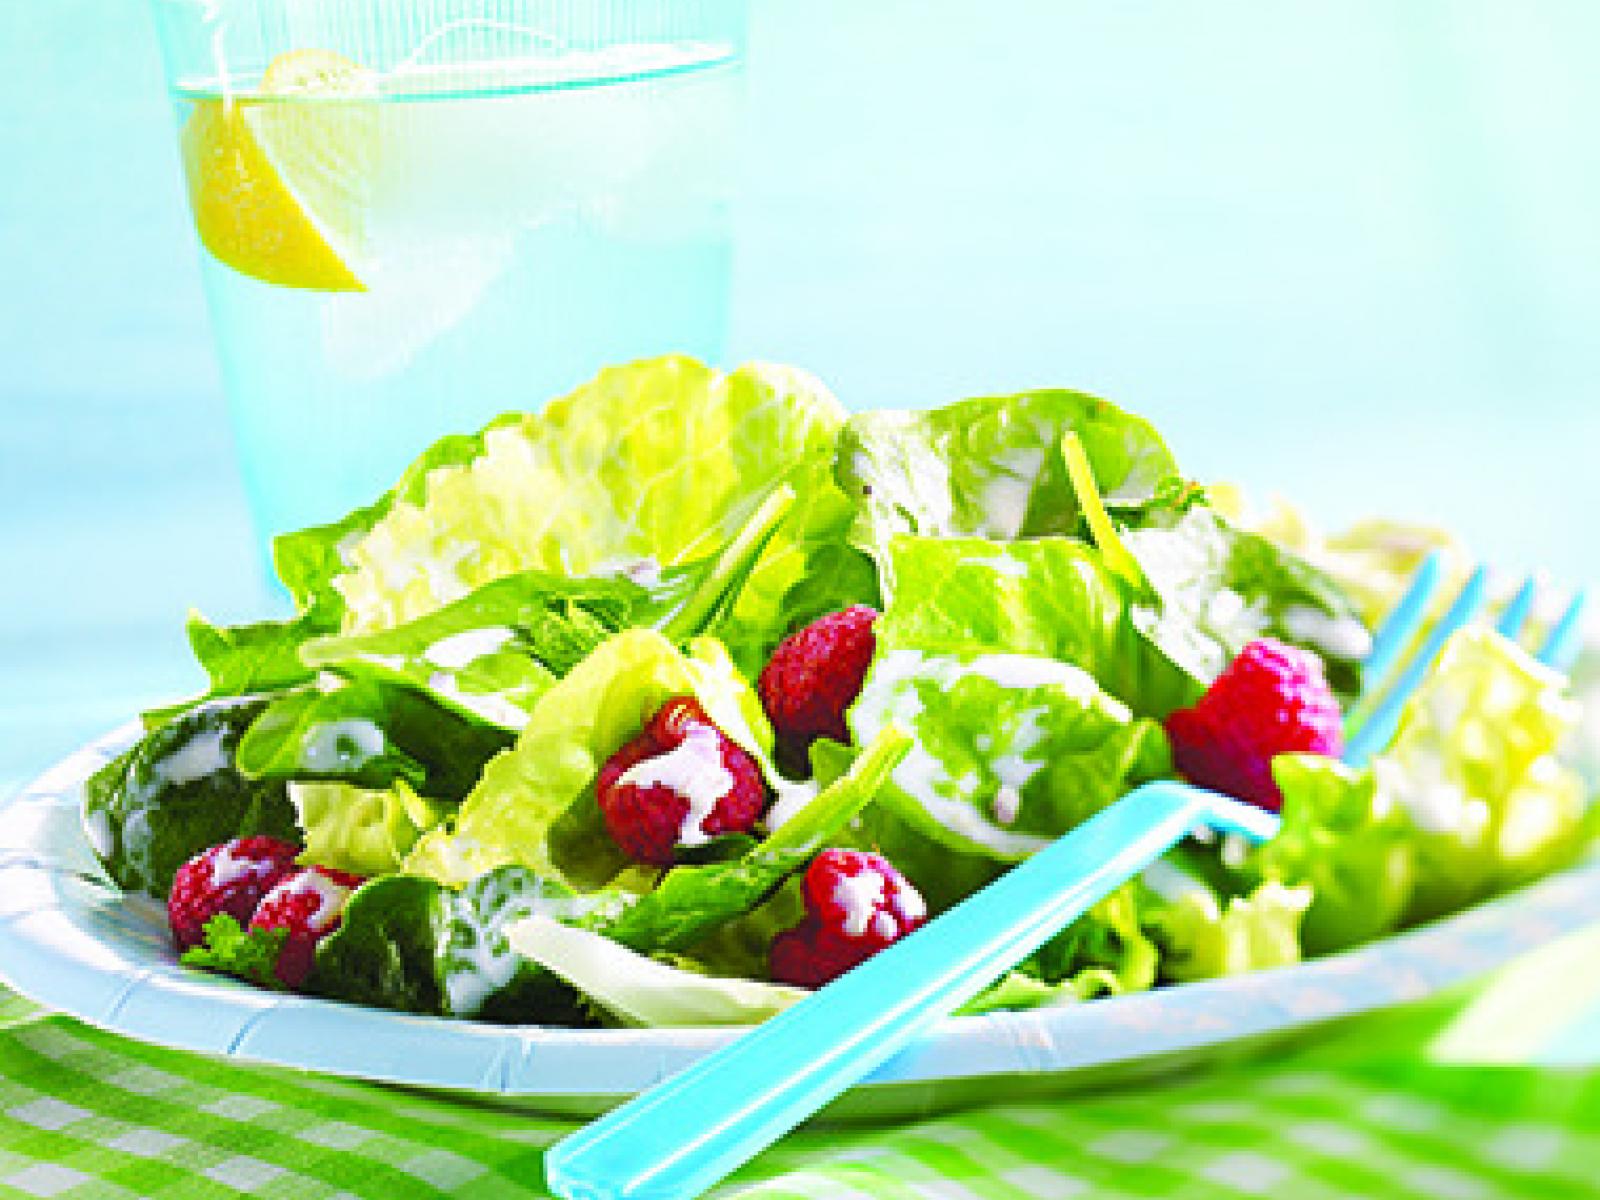 Green Salad with Raspberries and Cream